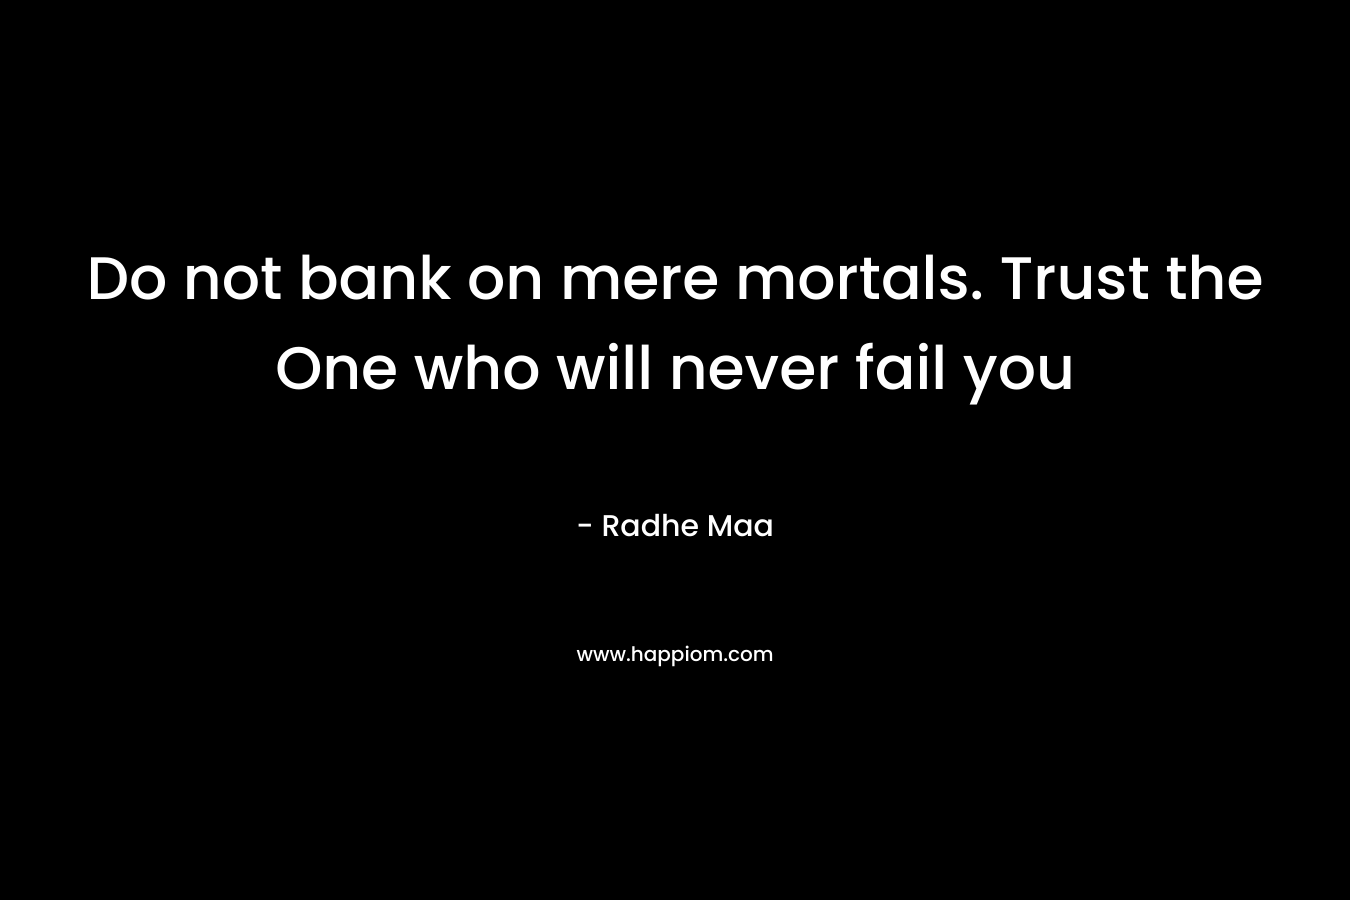 Do not bank on mere mortals. Trust the One who will never fail you